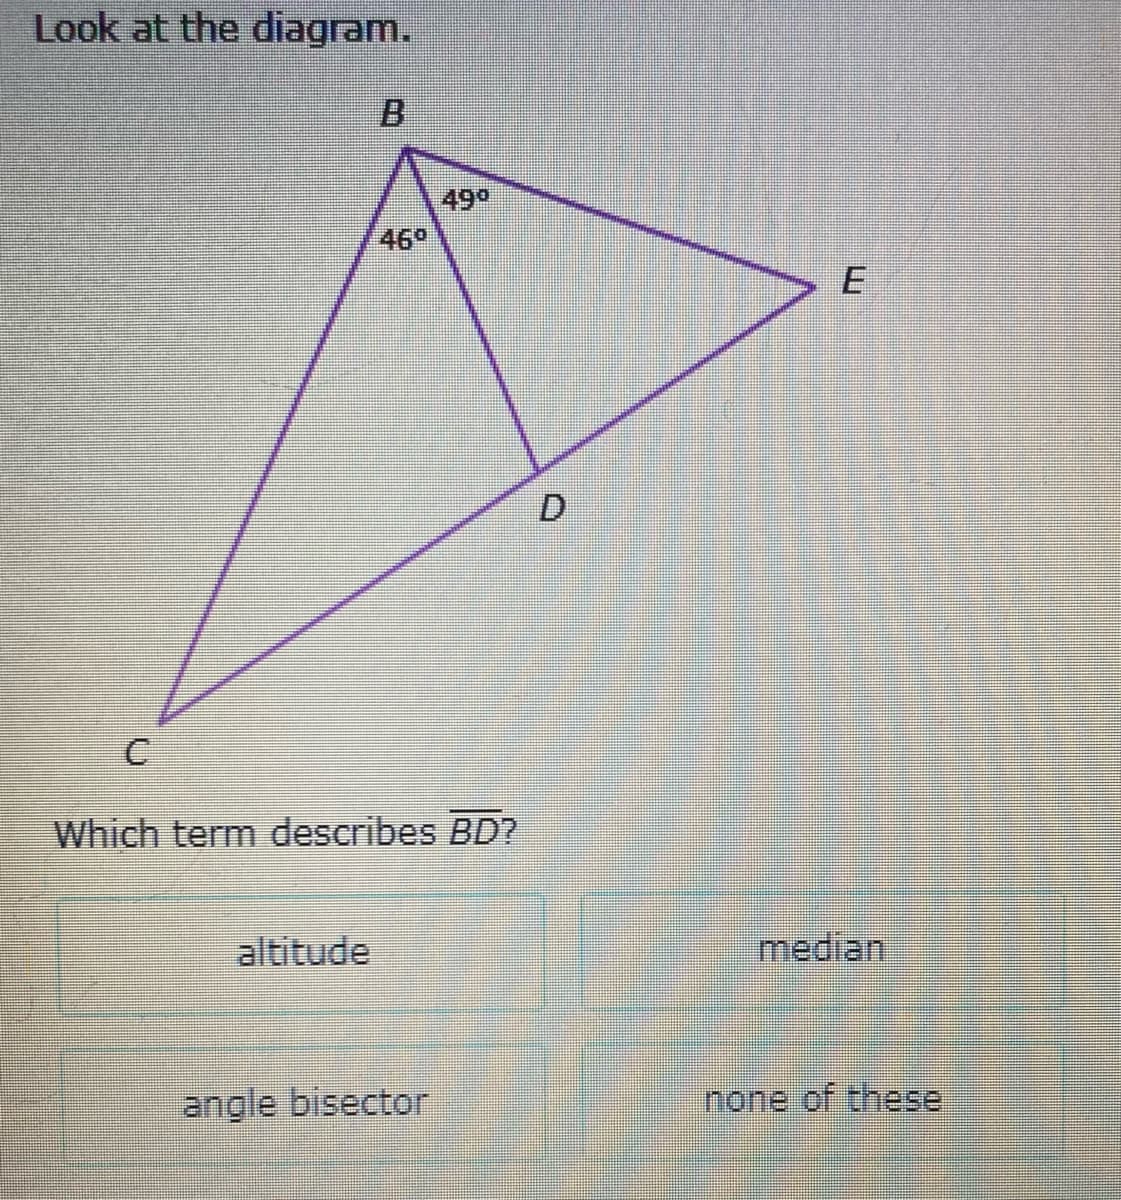 Look at the diagram.
B.
490
46°
Which term describes BD?
altitude
median
angle bisector
none of these
